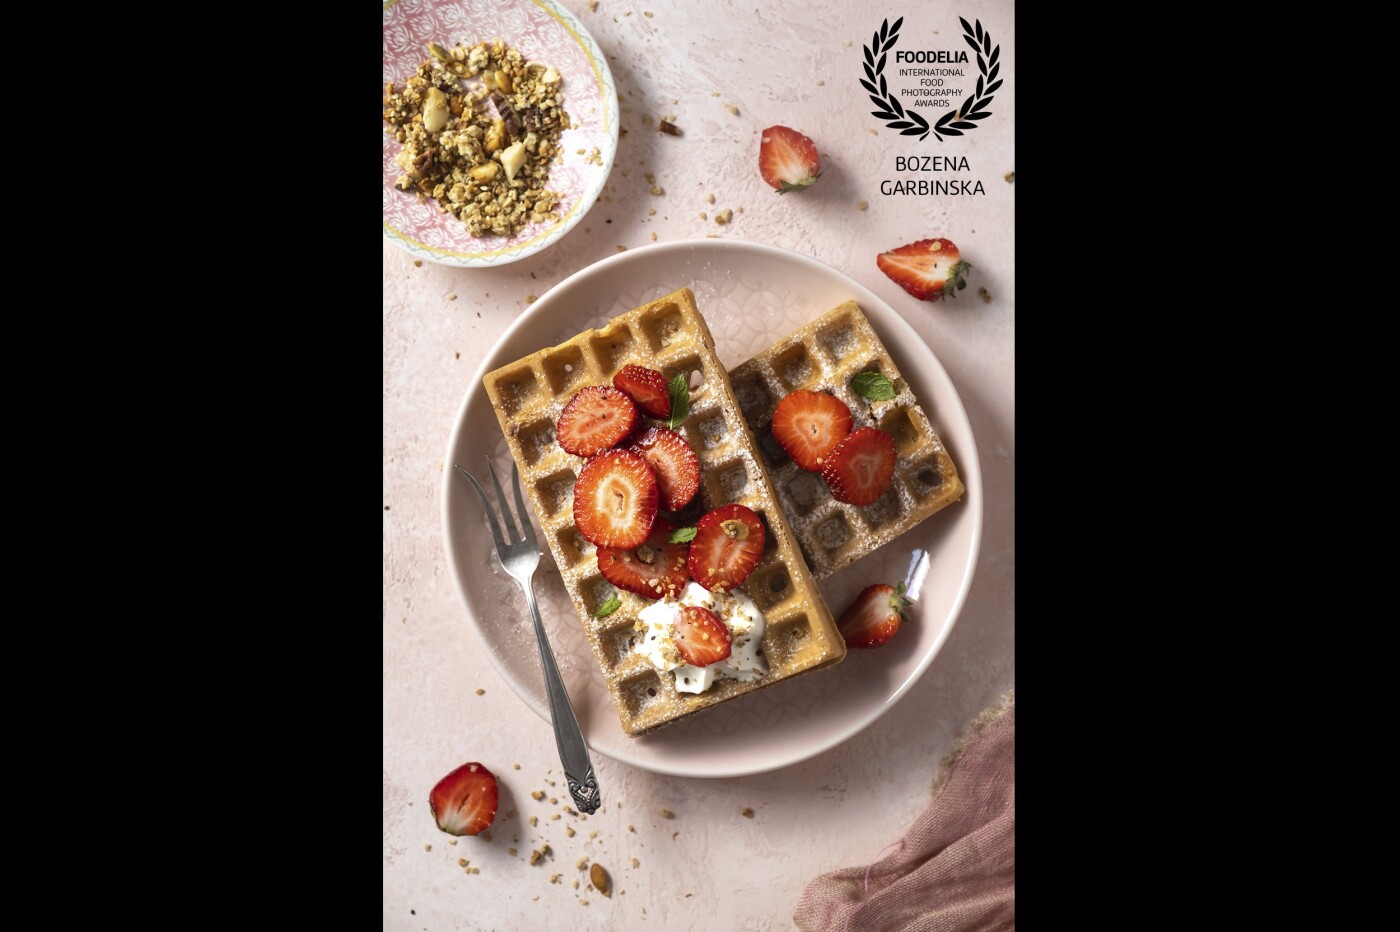 Gluten-free waffles - my first time with this recipe and full success. They tested everyone in my home.<br />
Camera: Fuji X-T3 <br />
Lens: Fujinon 16-55 mm <br />
Settings: ISO 160, 55 mm, f/4.5, 1/320 sec, tripod, daylight